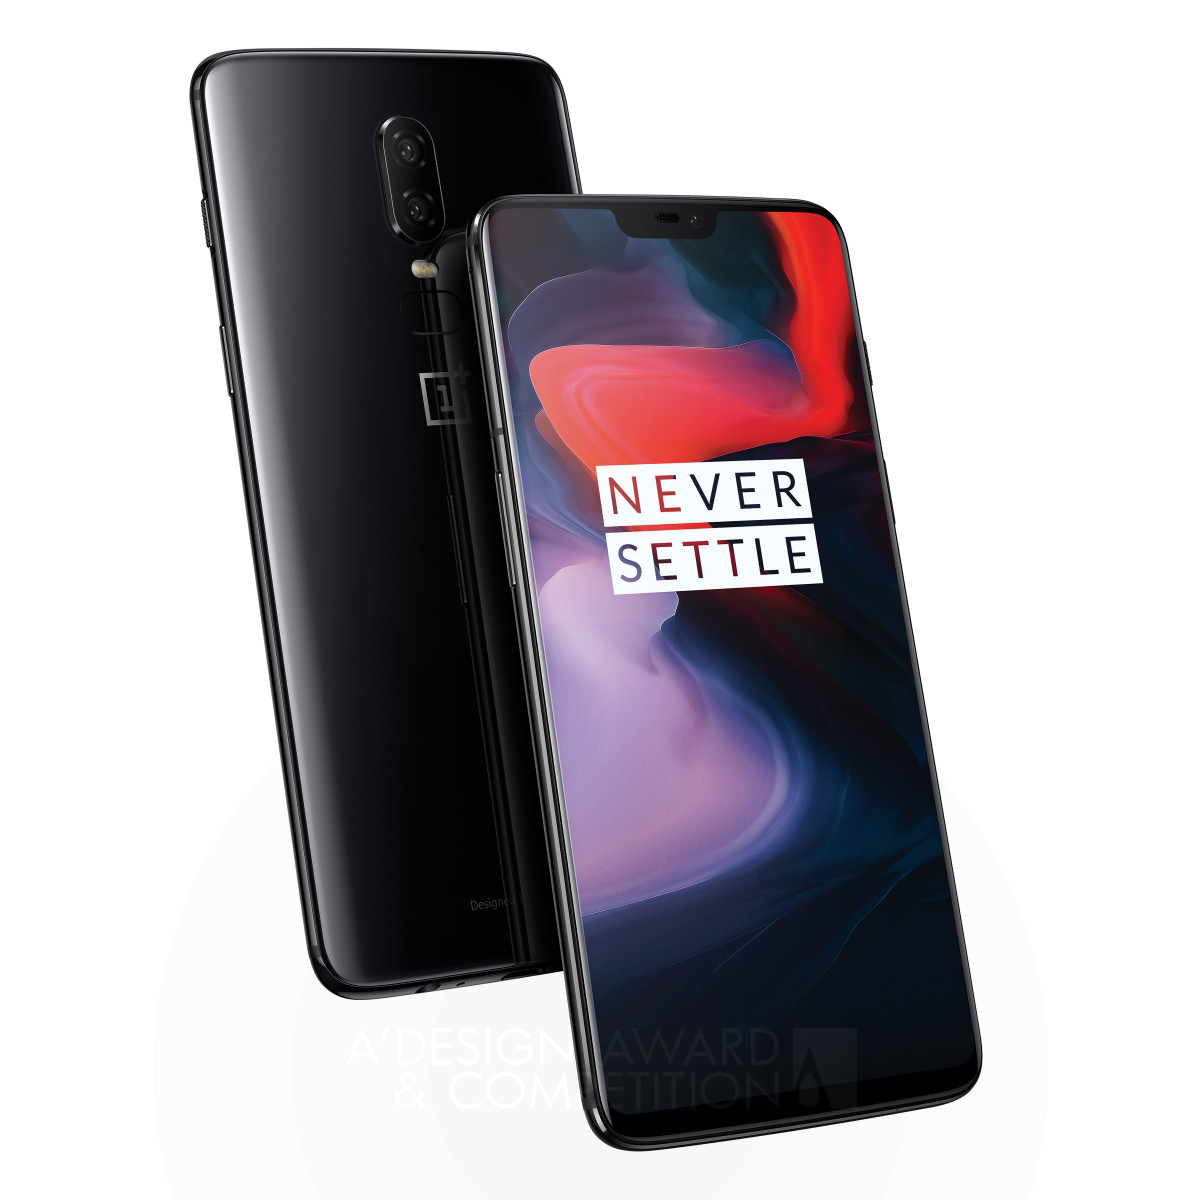 OnePlus 6 Smart Phone by OnePlus Industrial Design Lab Platinum Digital and Electronic Device Design Award Winner 2019 